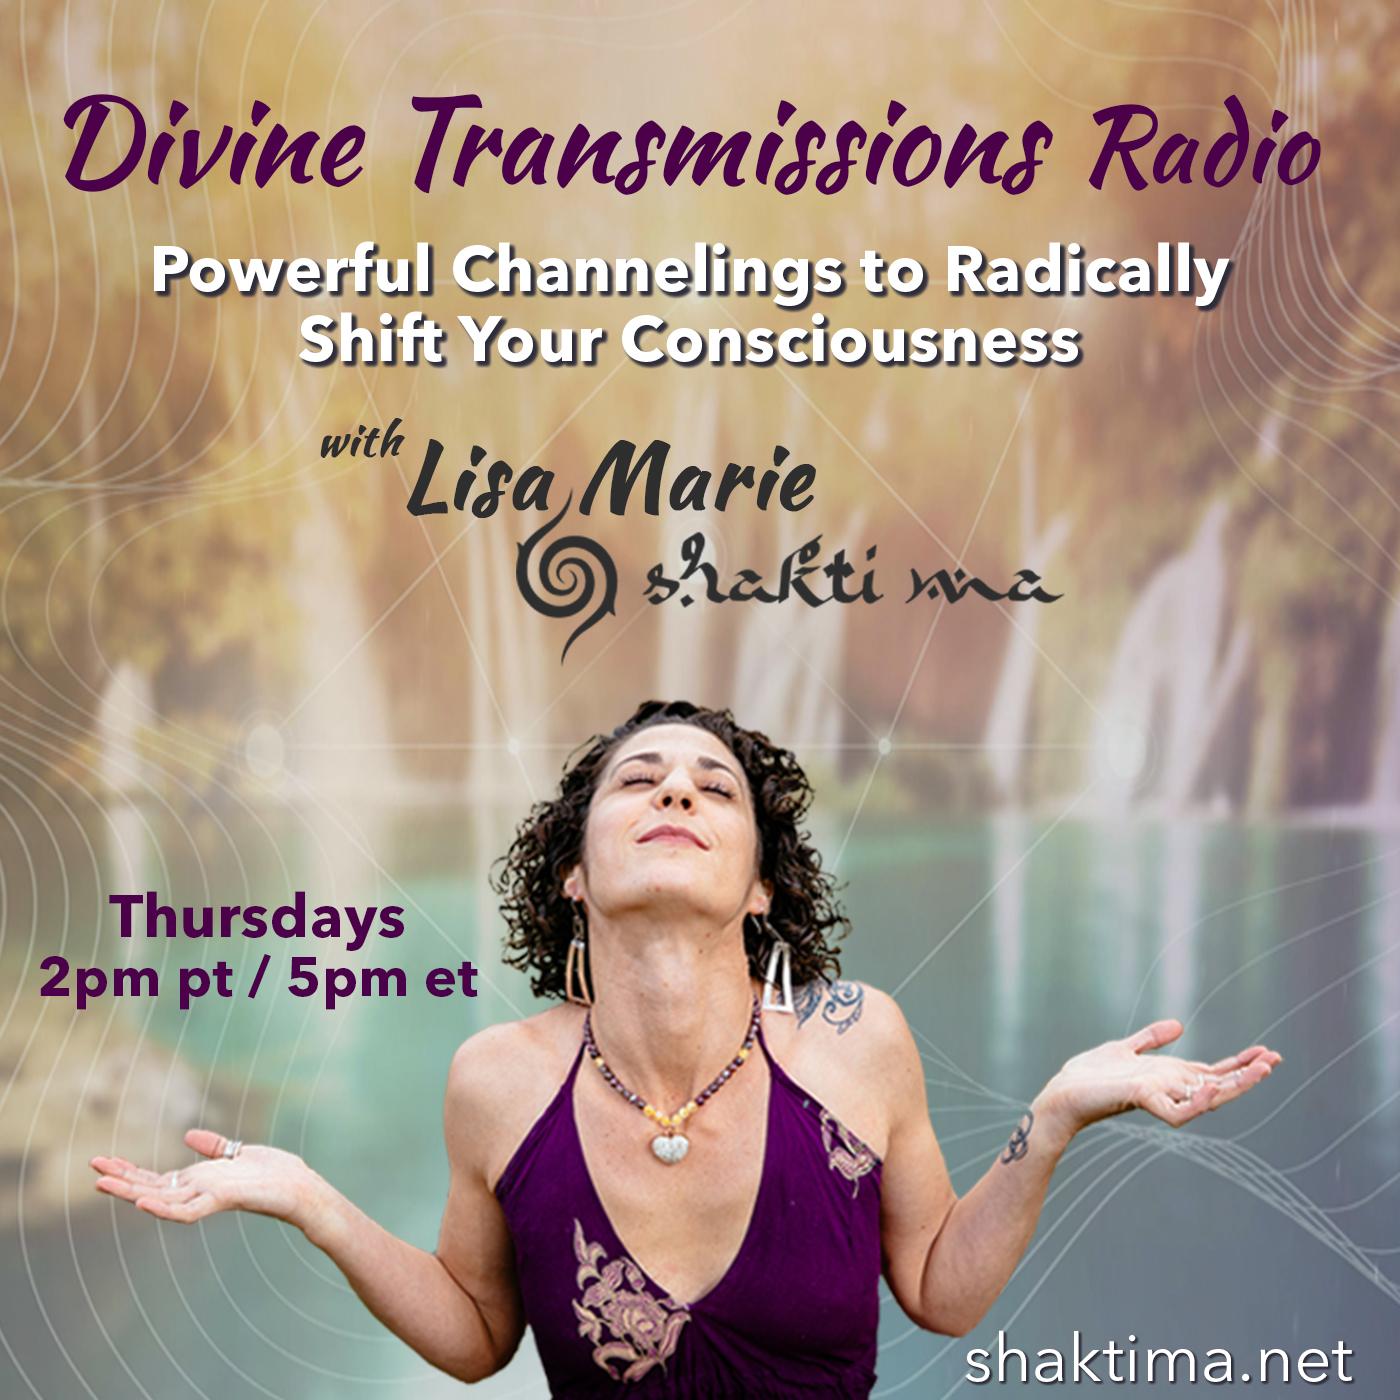 Divine Transmissions Radio with Lisa Marie - Shakti Ma:  Powerful Channelings to Radically Shift Your Consciousness